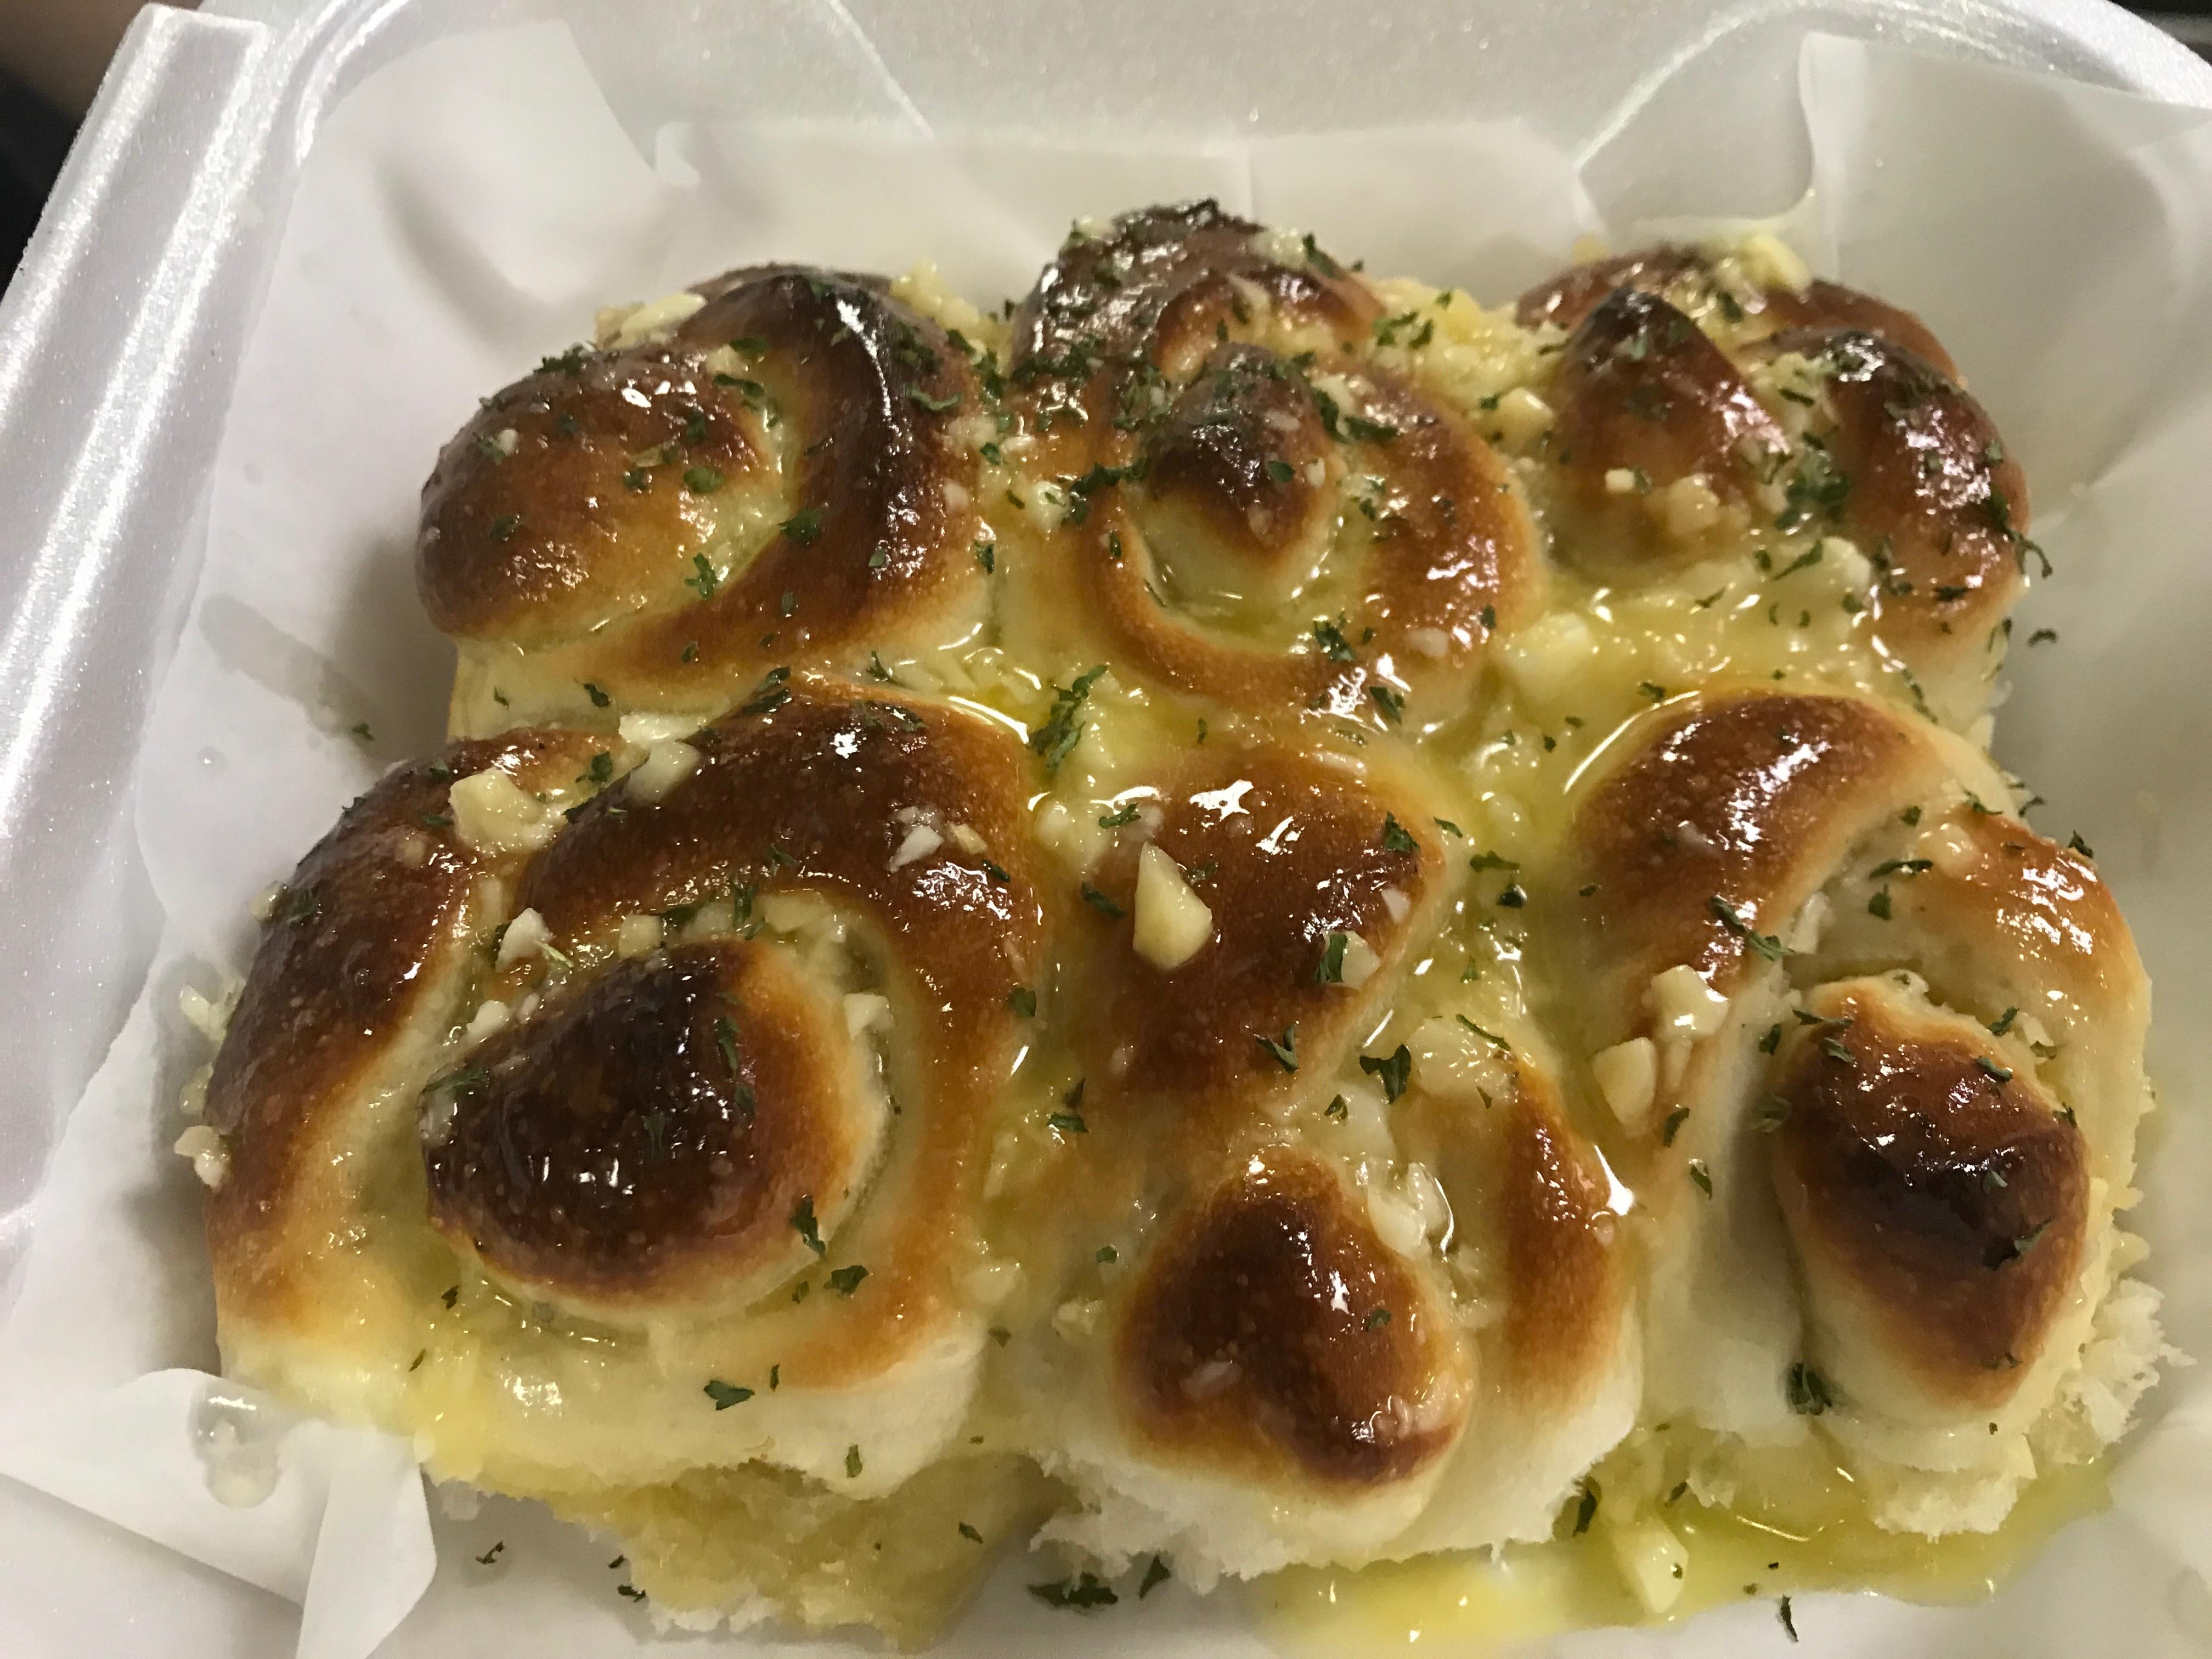 Fresh Garlic Rolls, Made In-House Daily Broadway Pizza & Subs West Palm Beach (561)855-6462